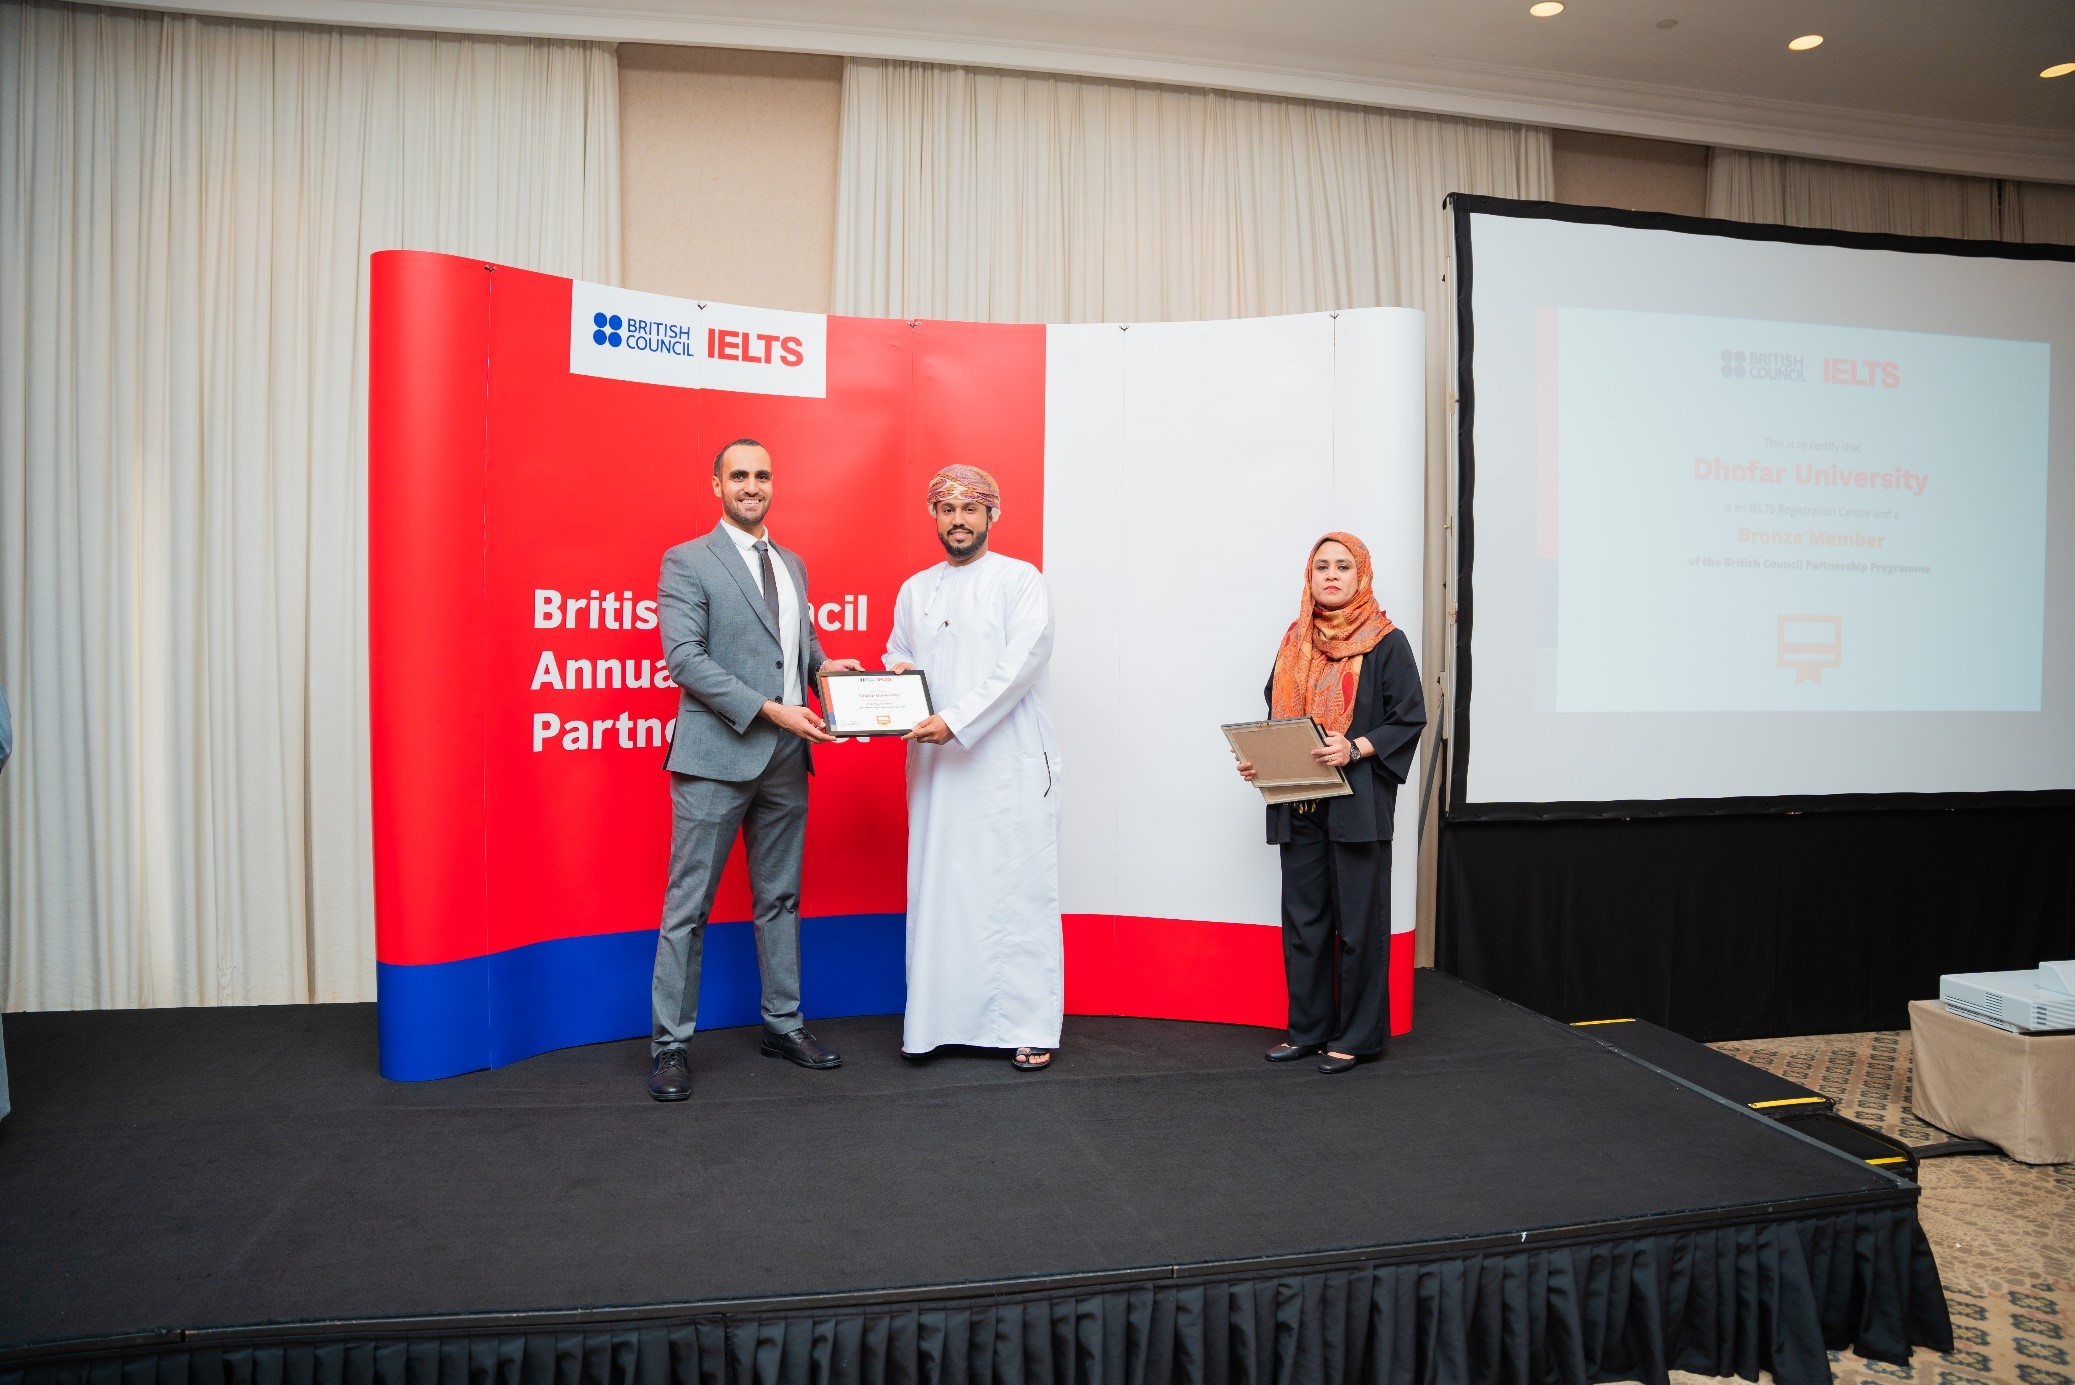 DU awarded an appreciation certificate as one of the accredited primary centers for IELTS testing